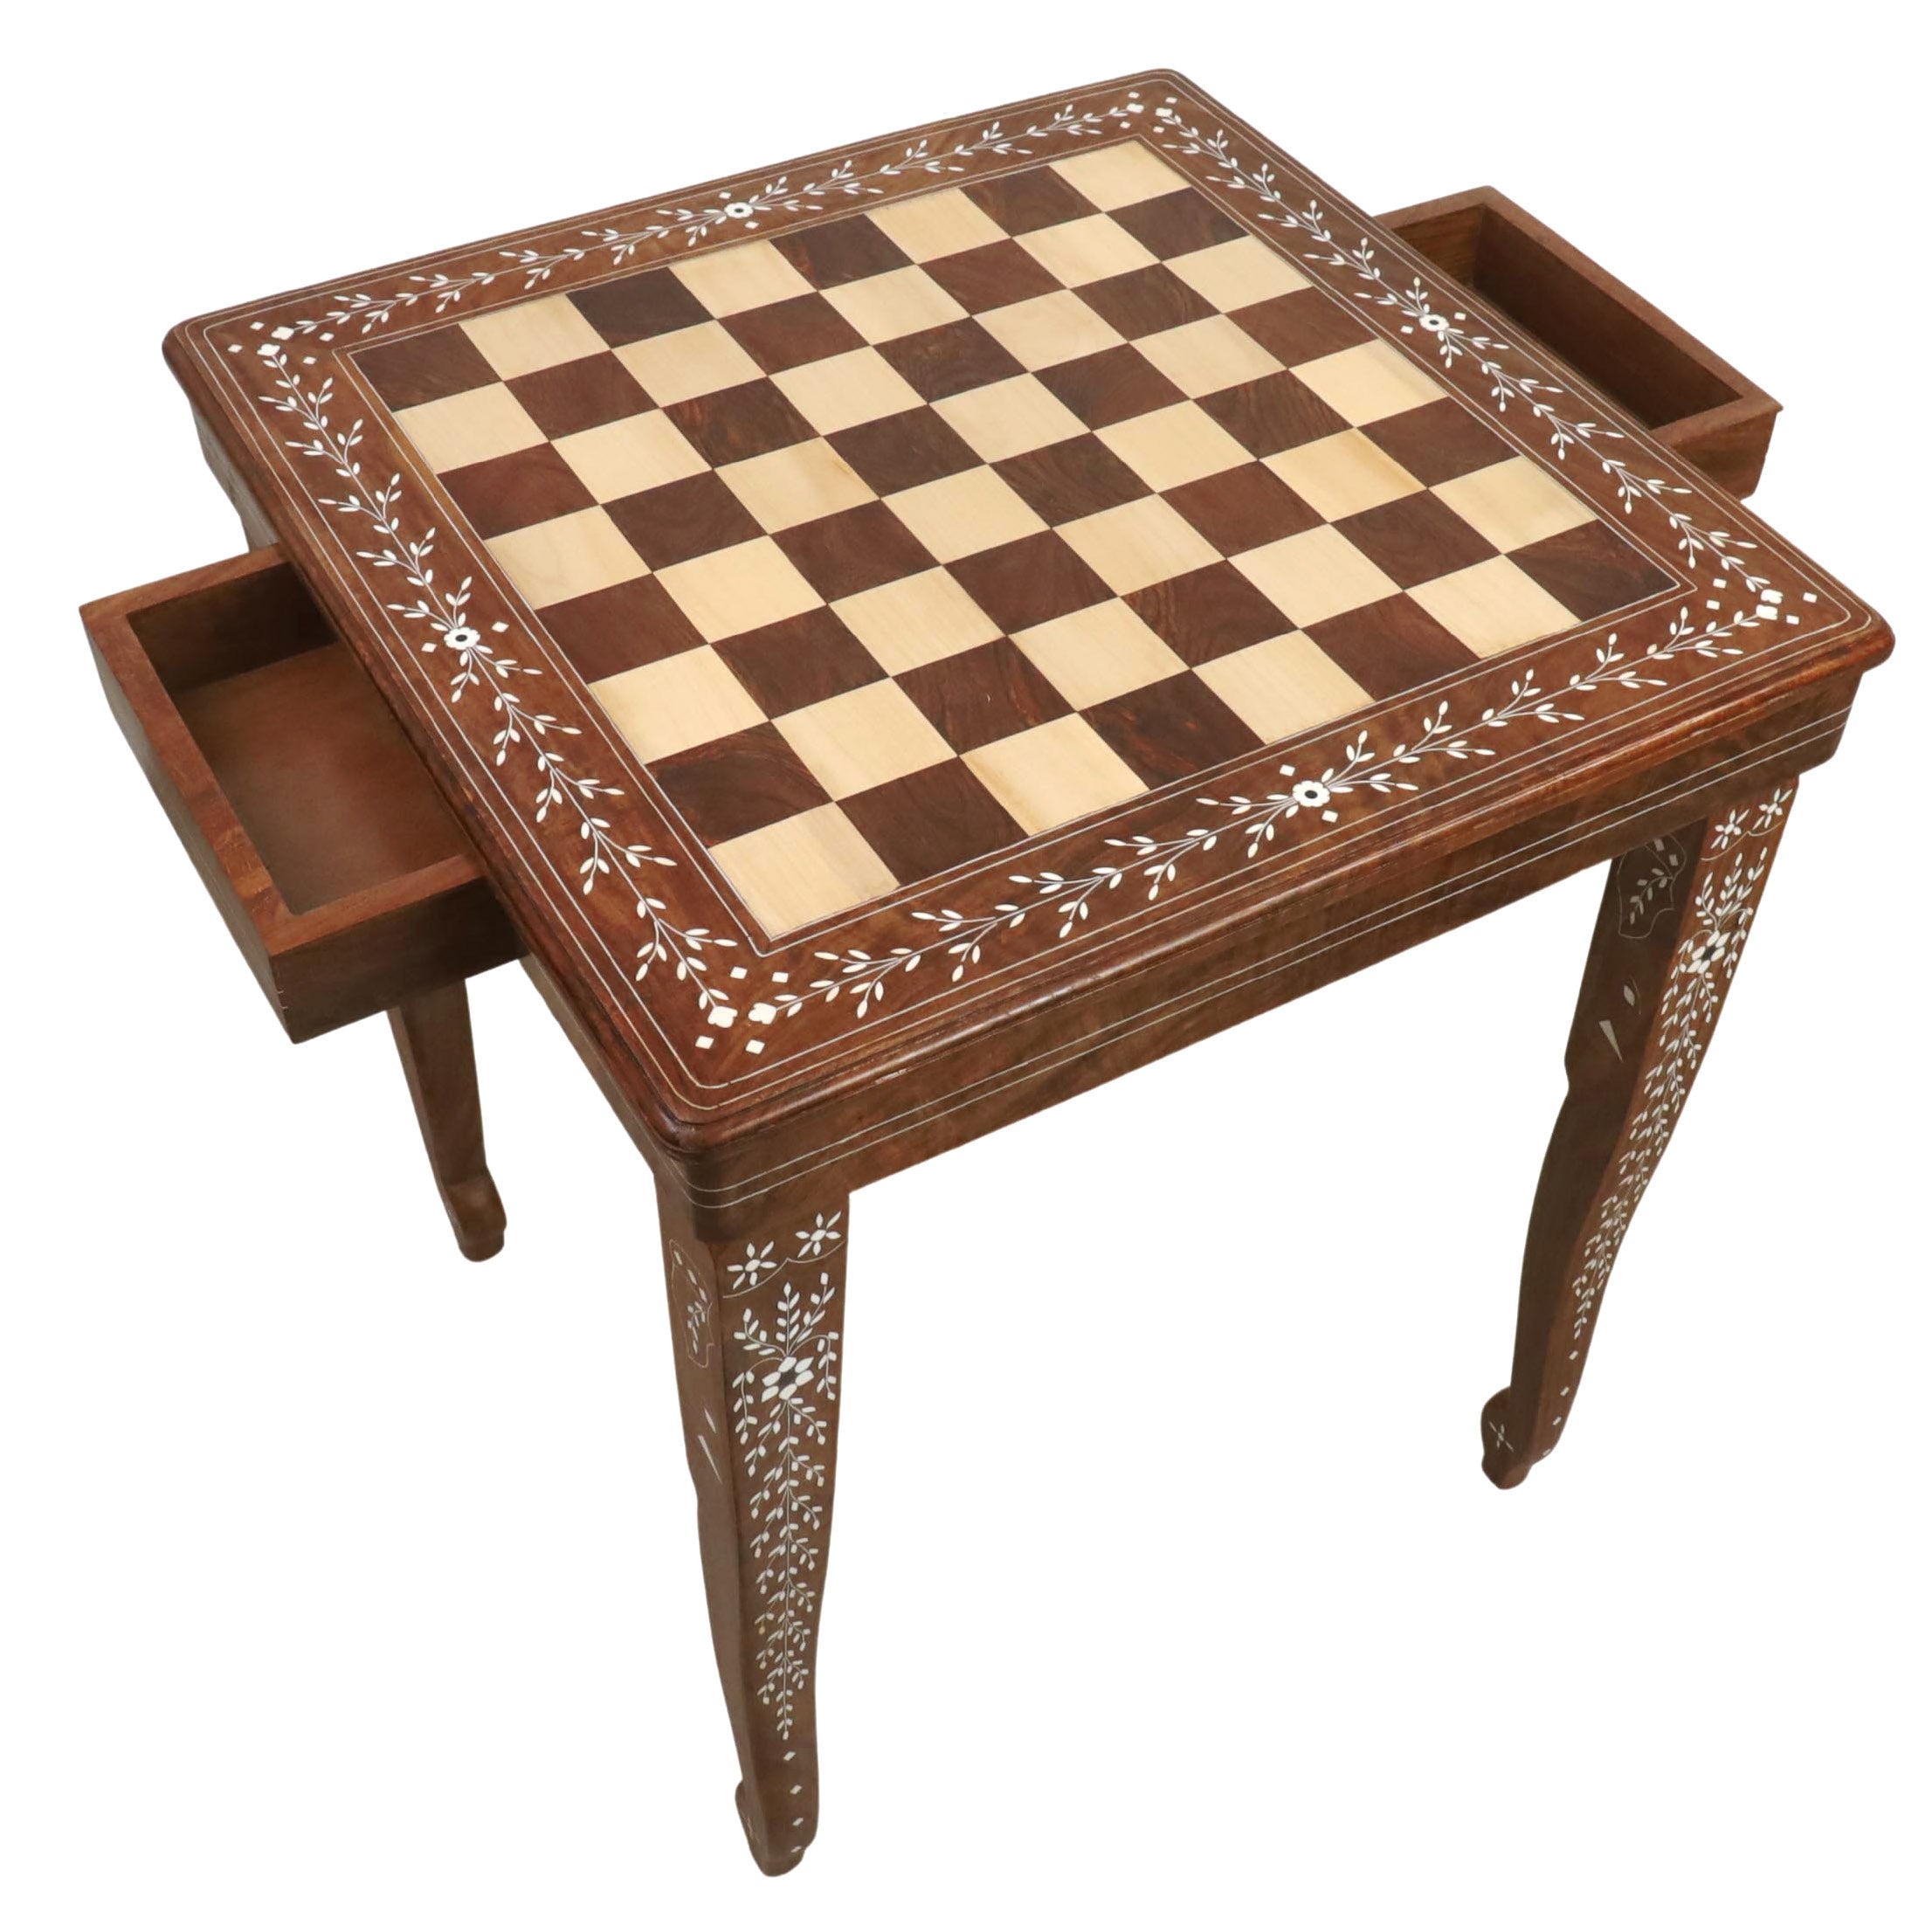 23" Regalia Luxury Chess Board Table With Drawers - 27" Height - Golden Rosewood